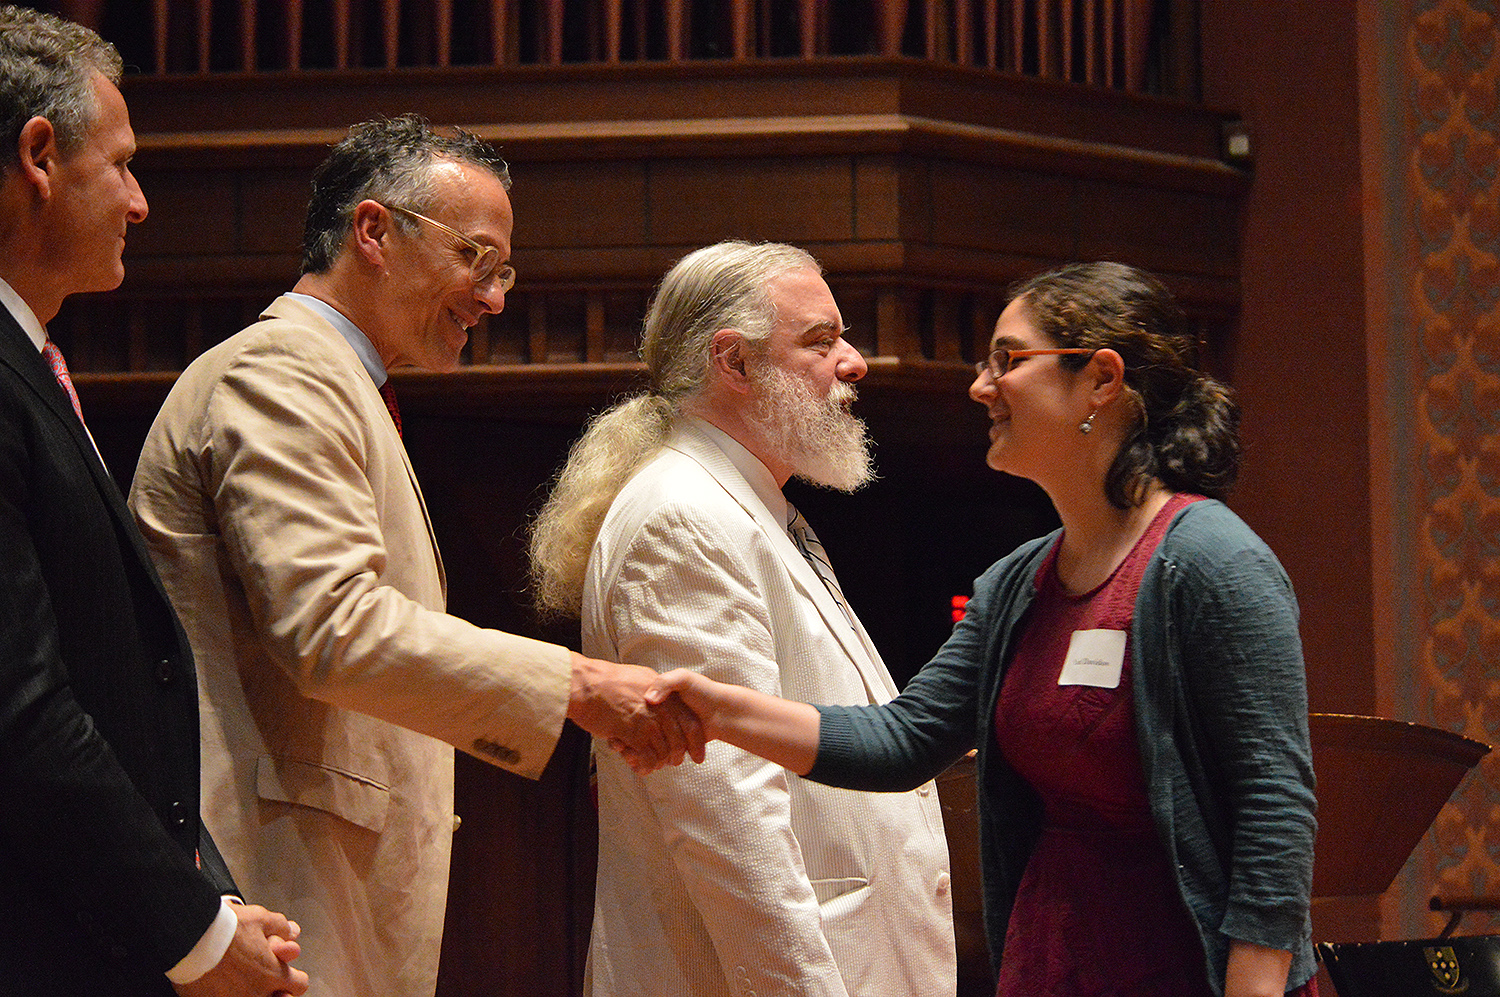 Members of the Class of 2016 were inducted into Phi Beta Kappa, a national academic honor society, in the Memorial Chapel on May 21. Jim Citrin P'12 P'14 was the featured speaker for the ceremony. (Photo by Tom Dzimian)